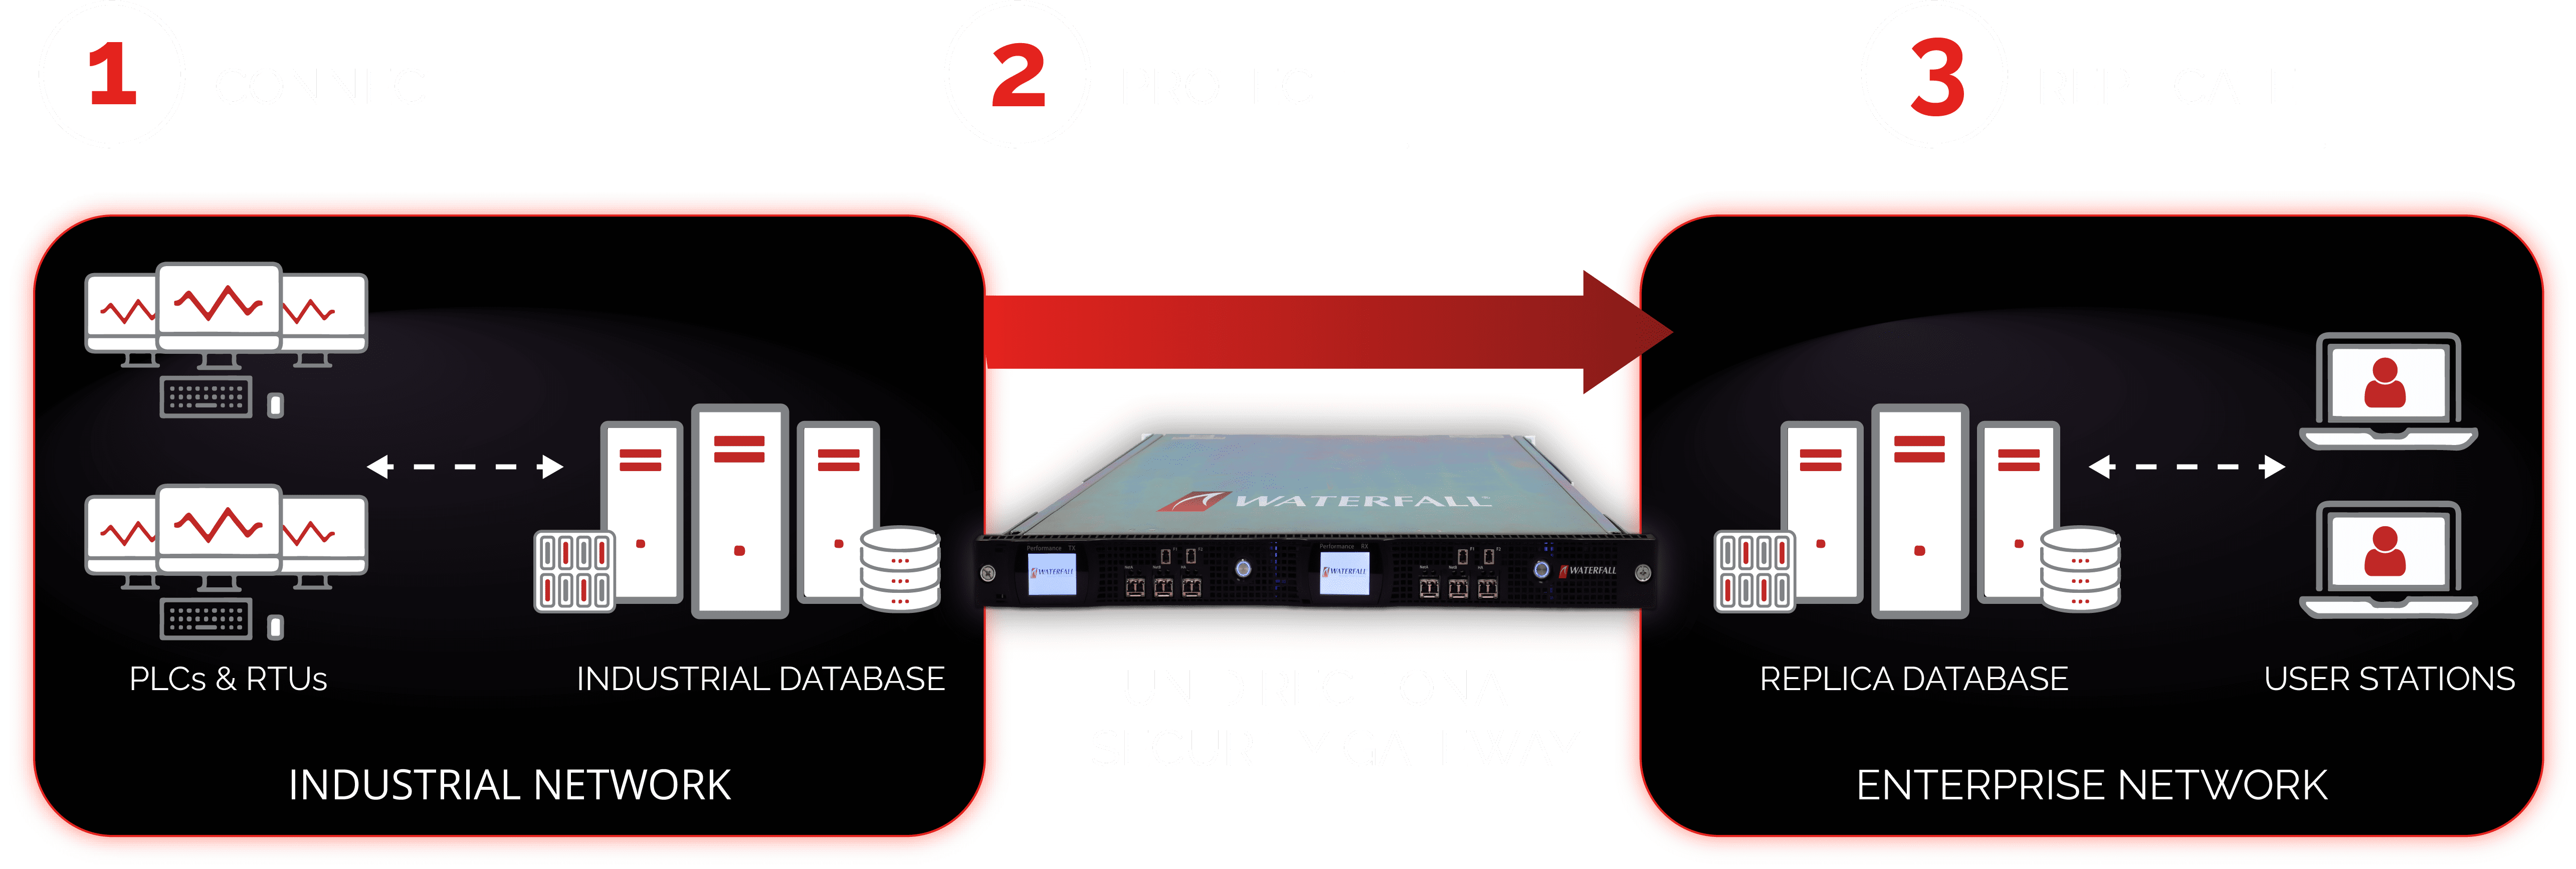 UNIDIRECTIONAL SECURITY GATEWAY visual explainer graphic